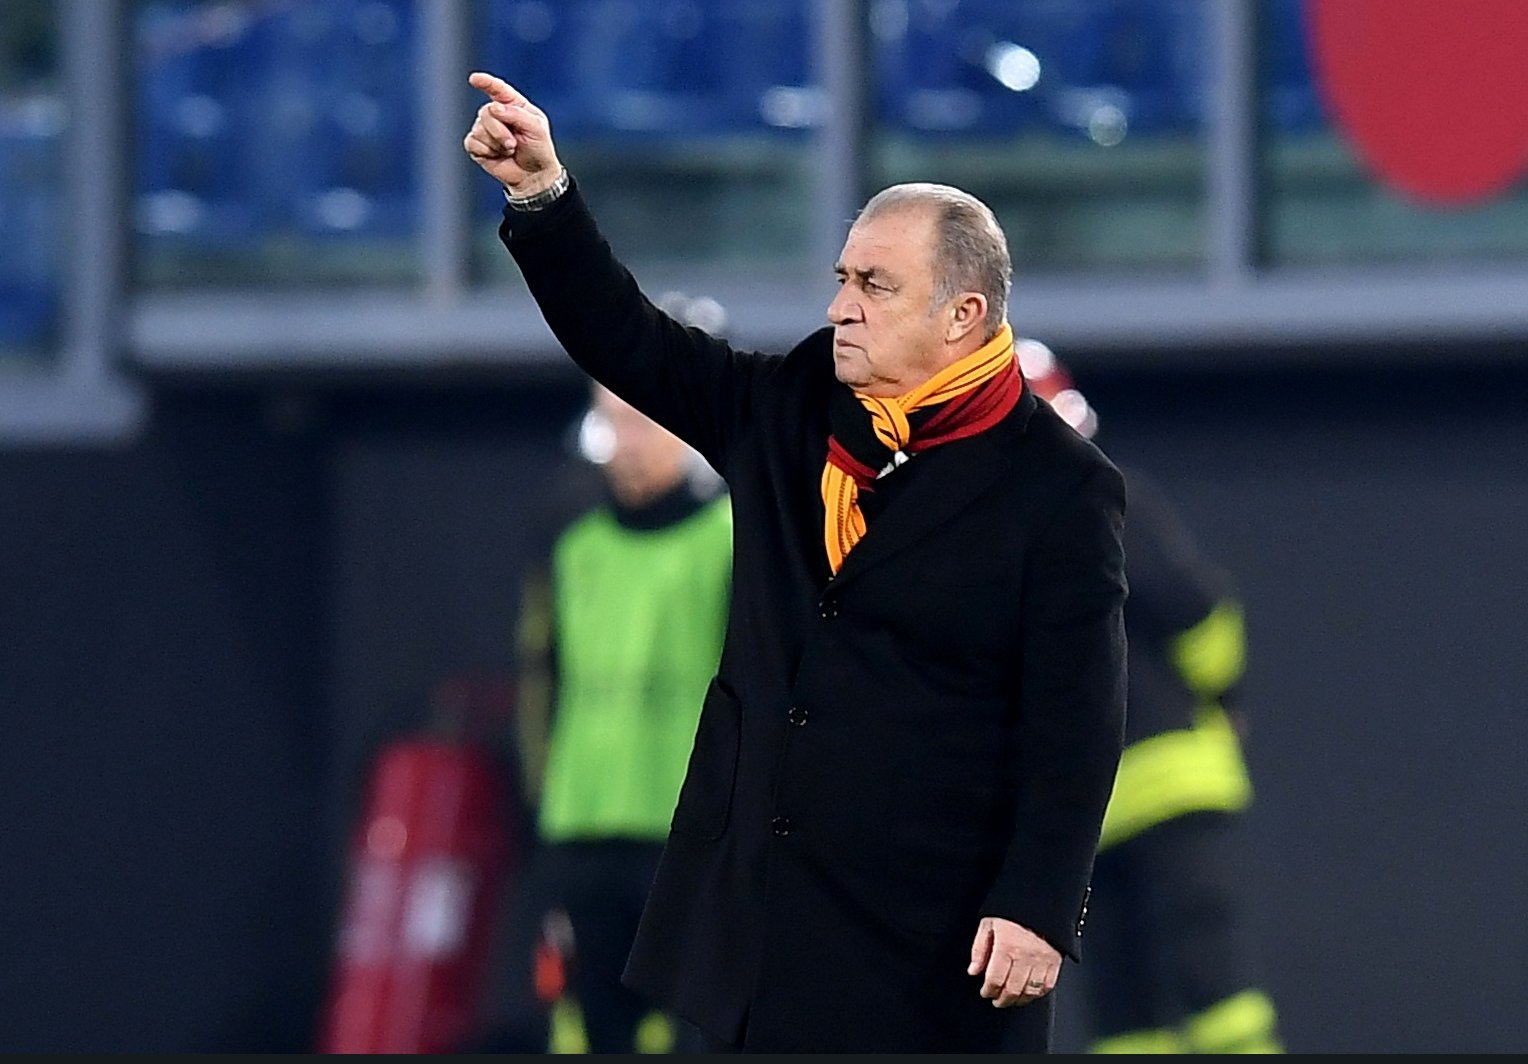 Galatasaray&#039;s legendary coach Fatih Terim gives instructions to the players during the UEFA Europa League Group E match between Lazio and Galatasaray at the Stadio Olimpico in Rome, Italy on Dec. 9, 2021 (Reuters Photo)